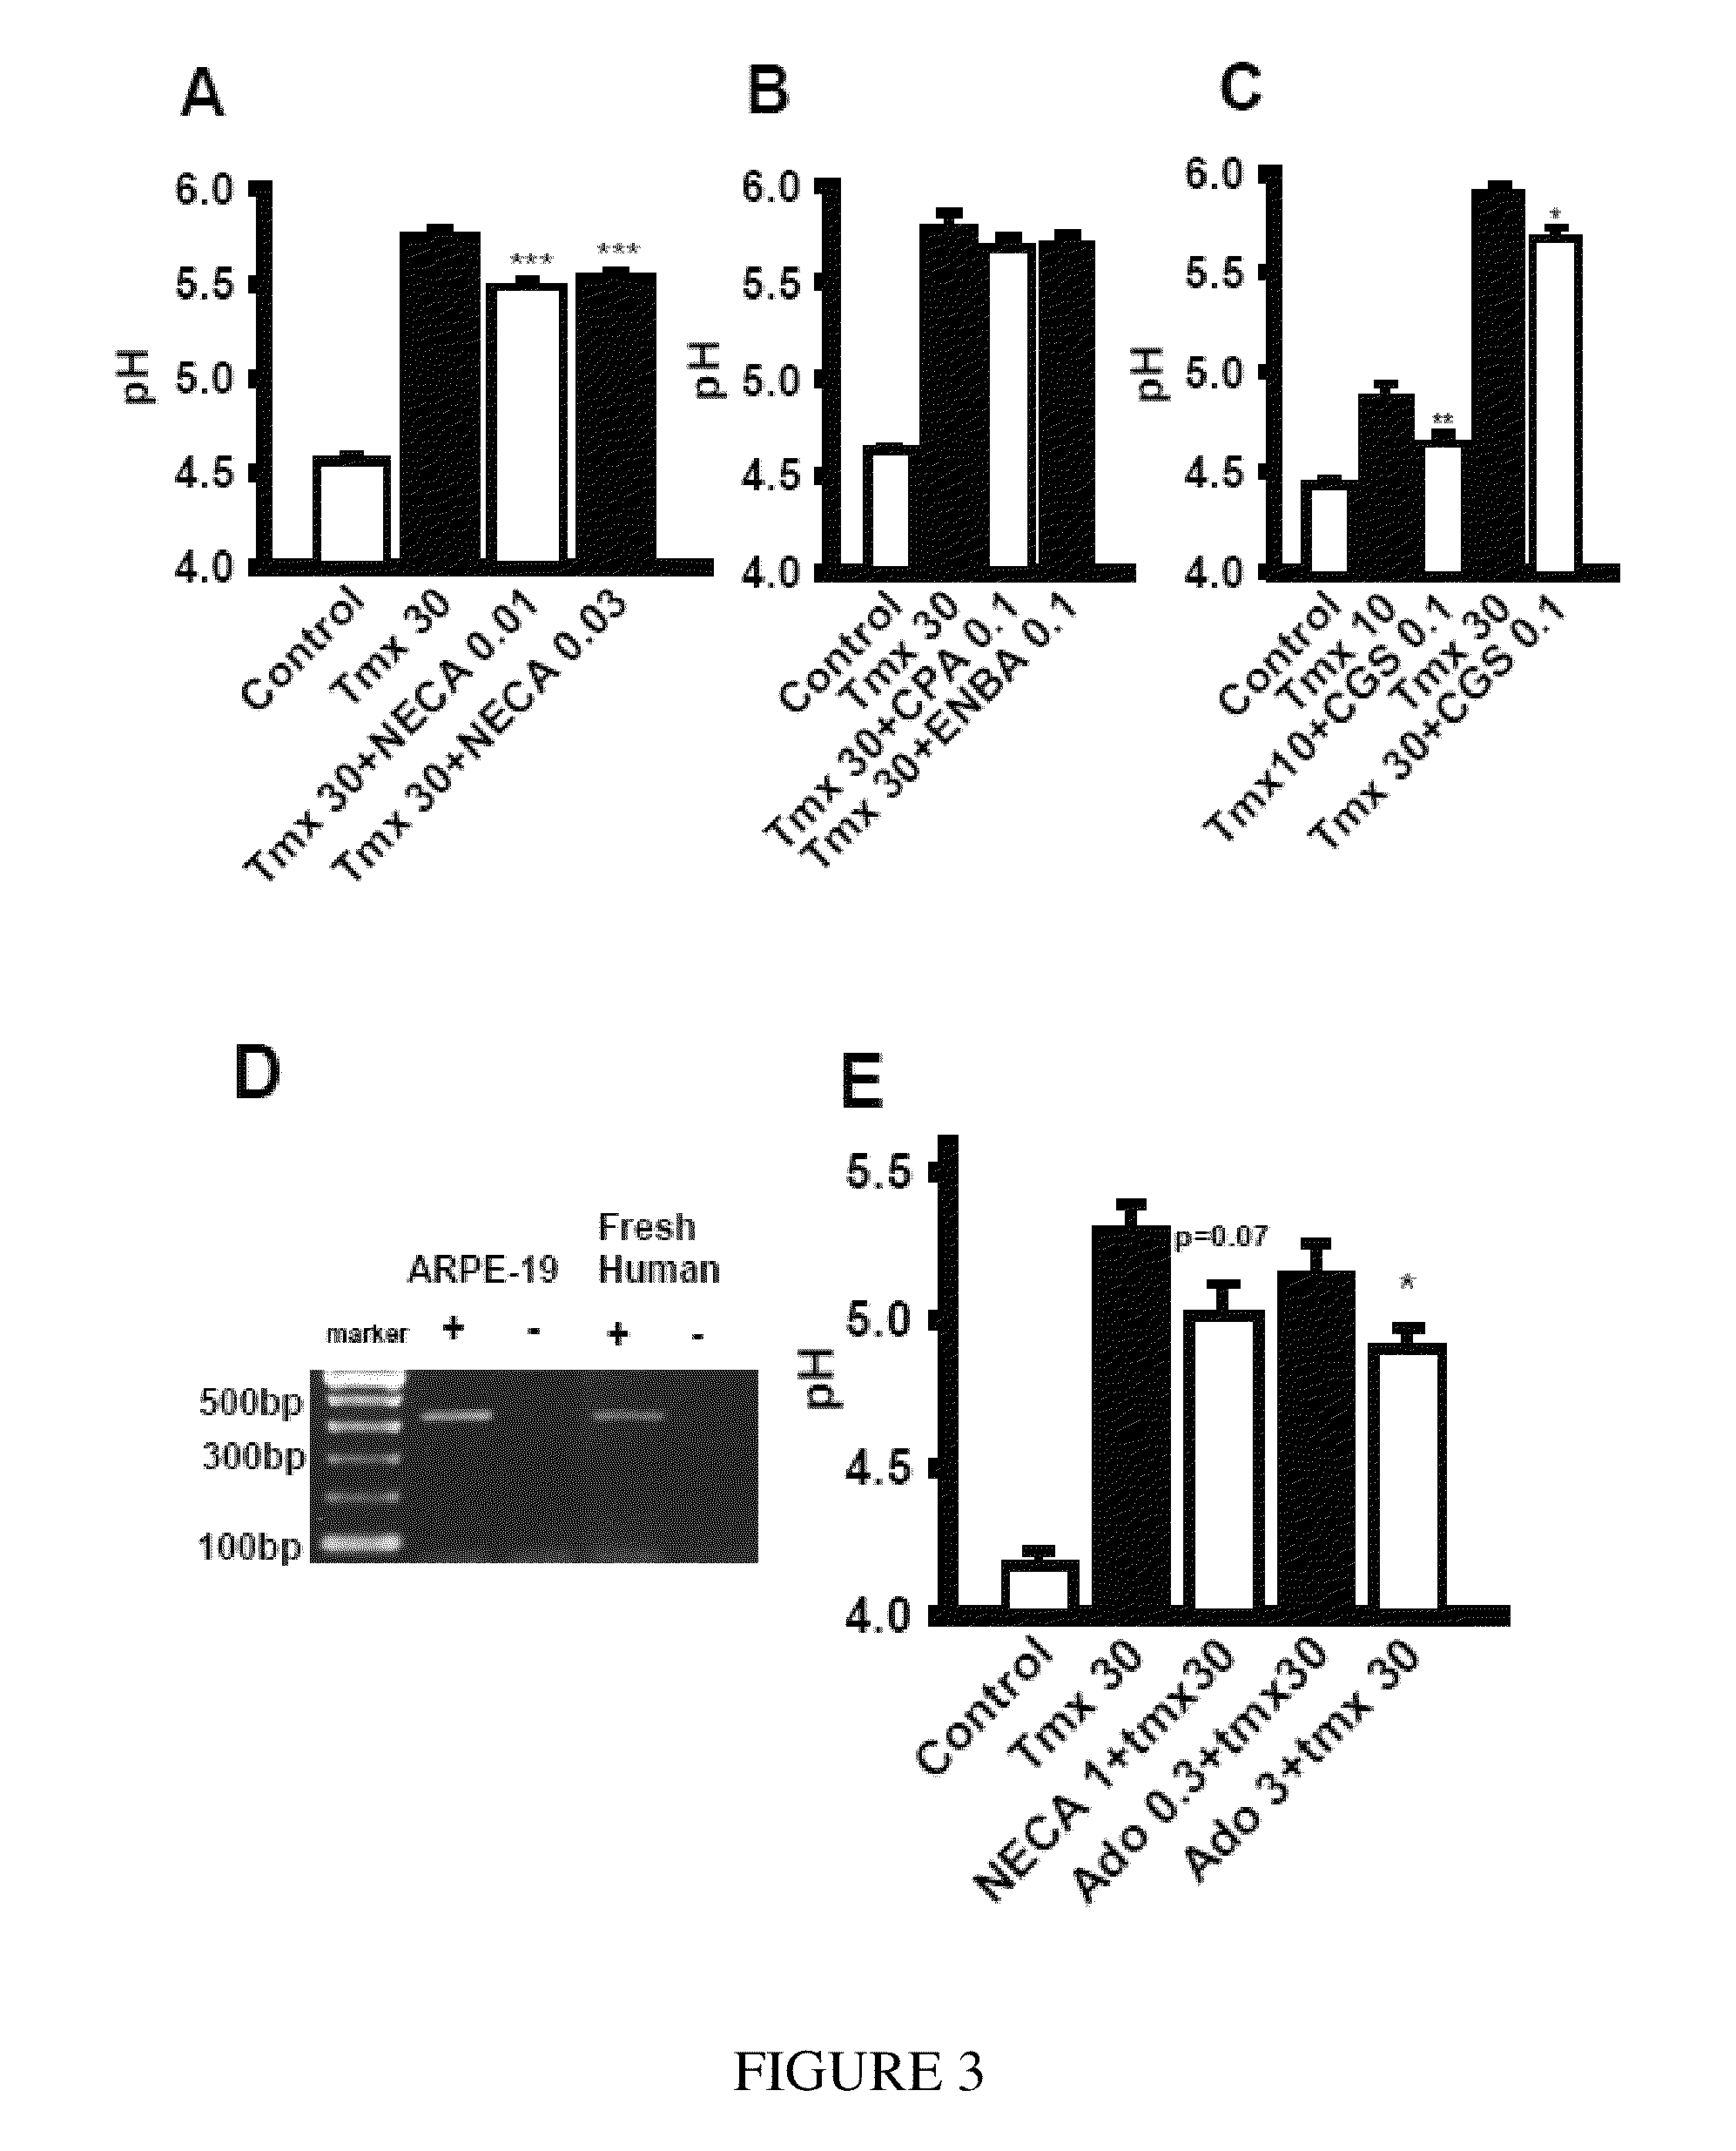 Method for treatment of macular degeneration by modulating P2Y12 or P2X7 receptors